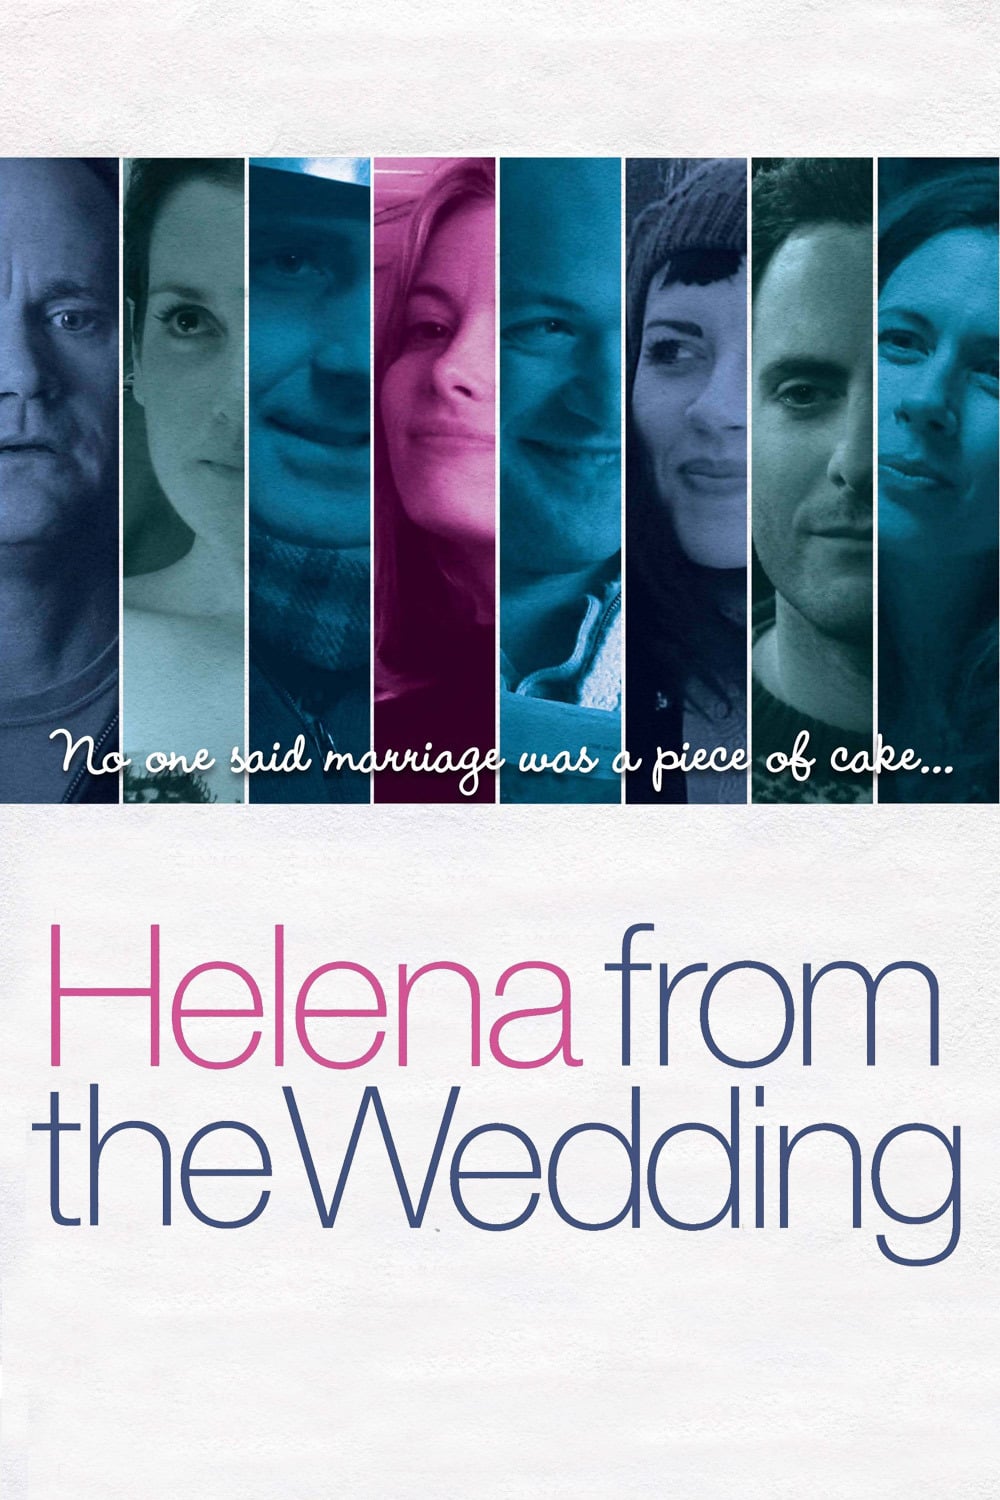 Helena from the Wedding, 2010 